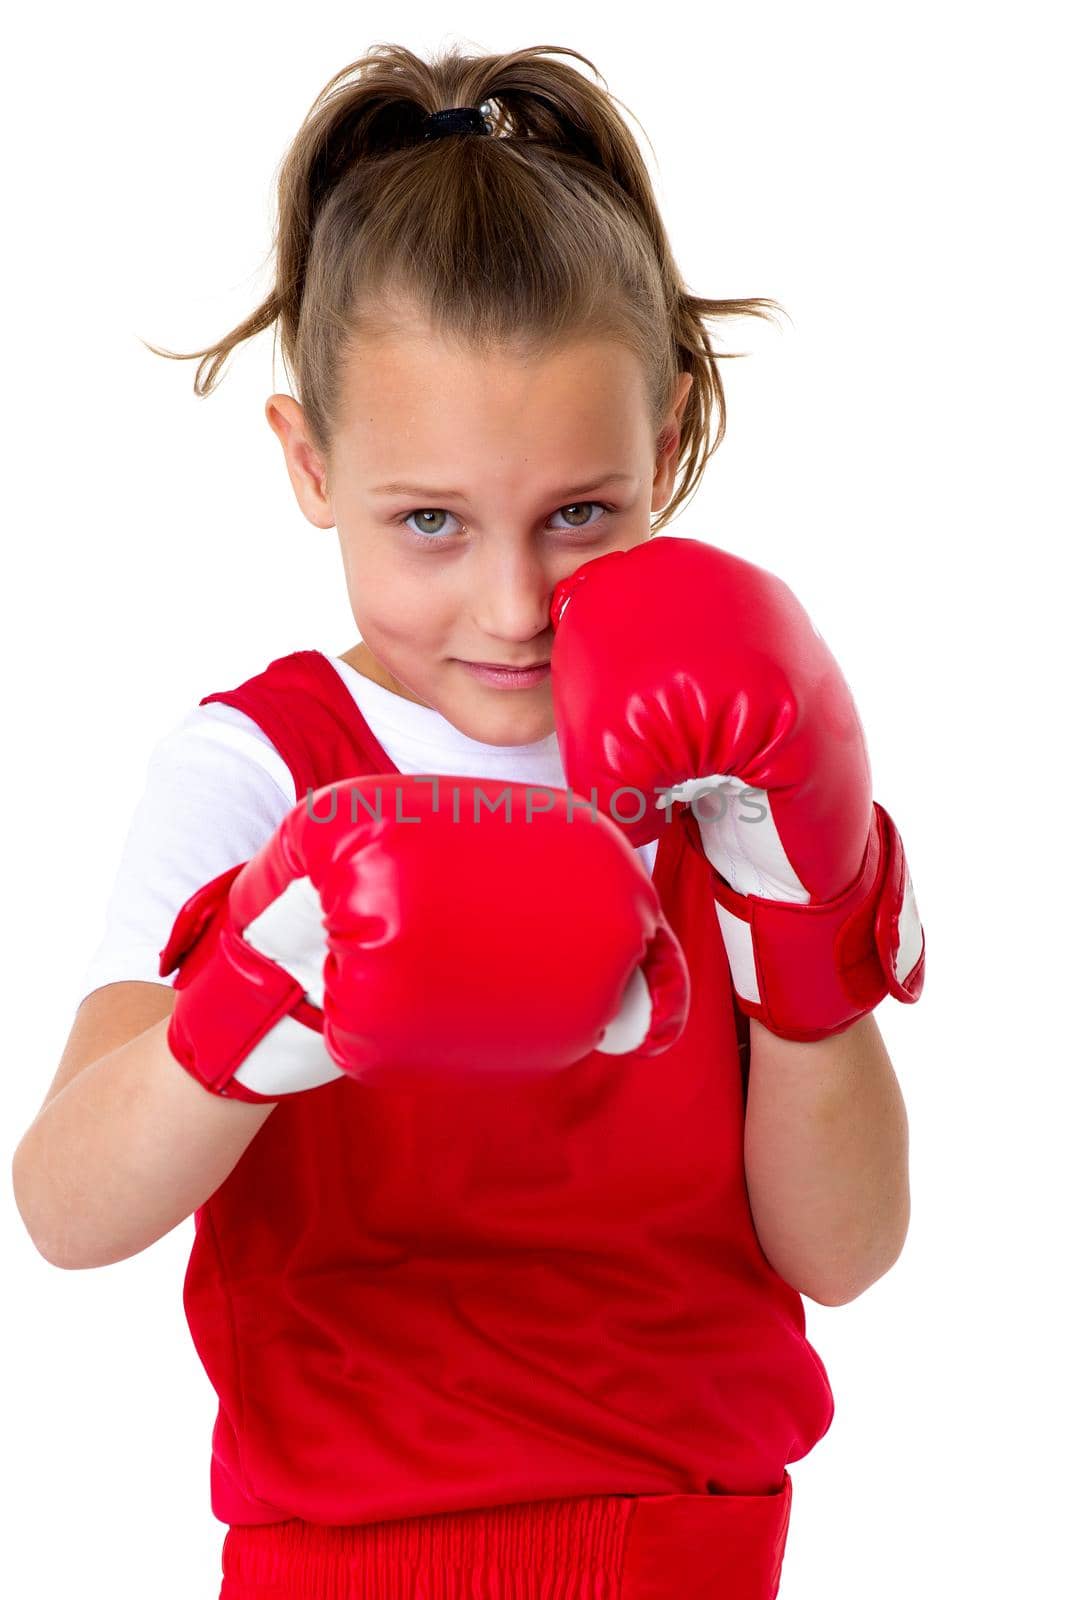 Sports boxer teenage girl. Close up portrait of beautiful girl in red sports uniform and boxing gloves doing boxing exercises. Teenager child posing in studio on white background